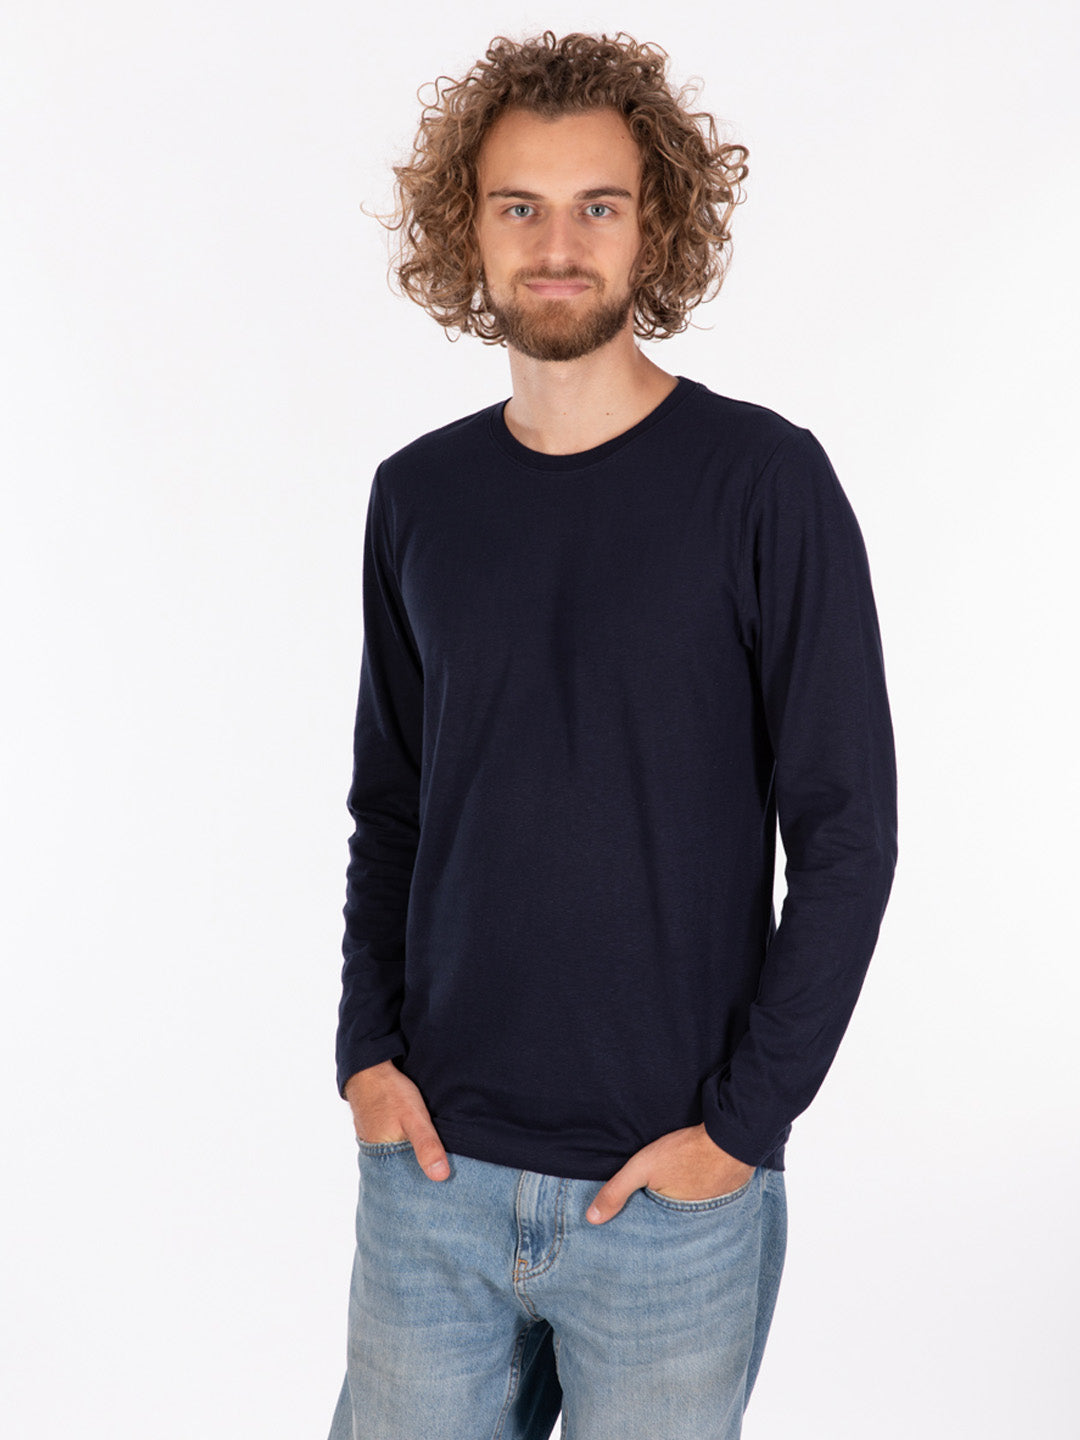 Navy long sleeve T-shirt from Switcher